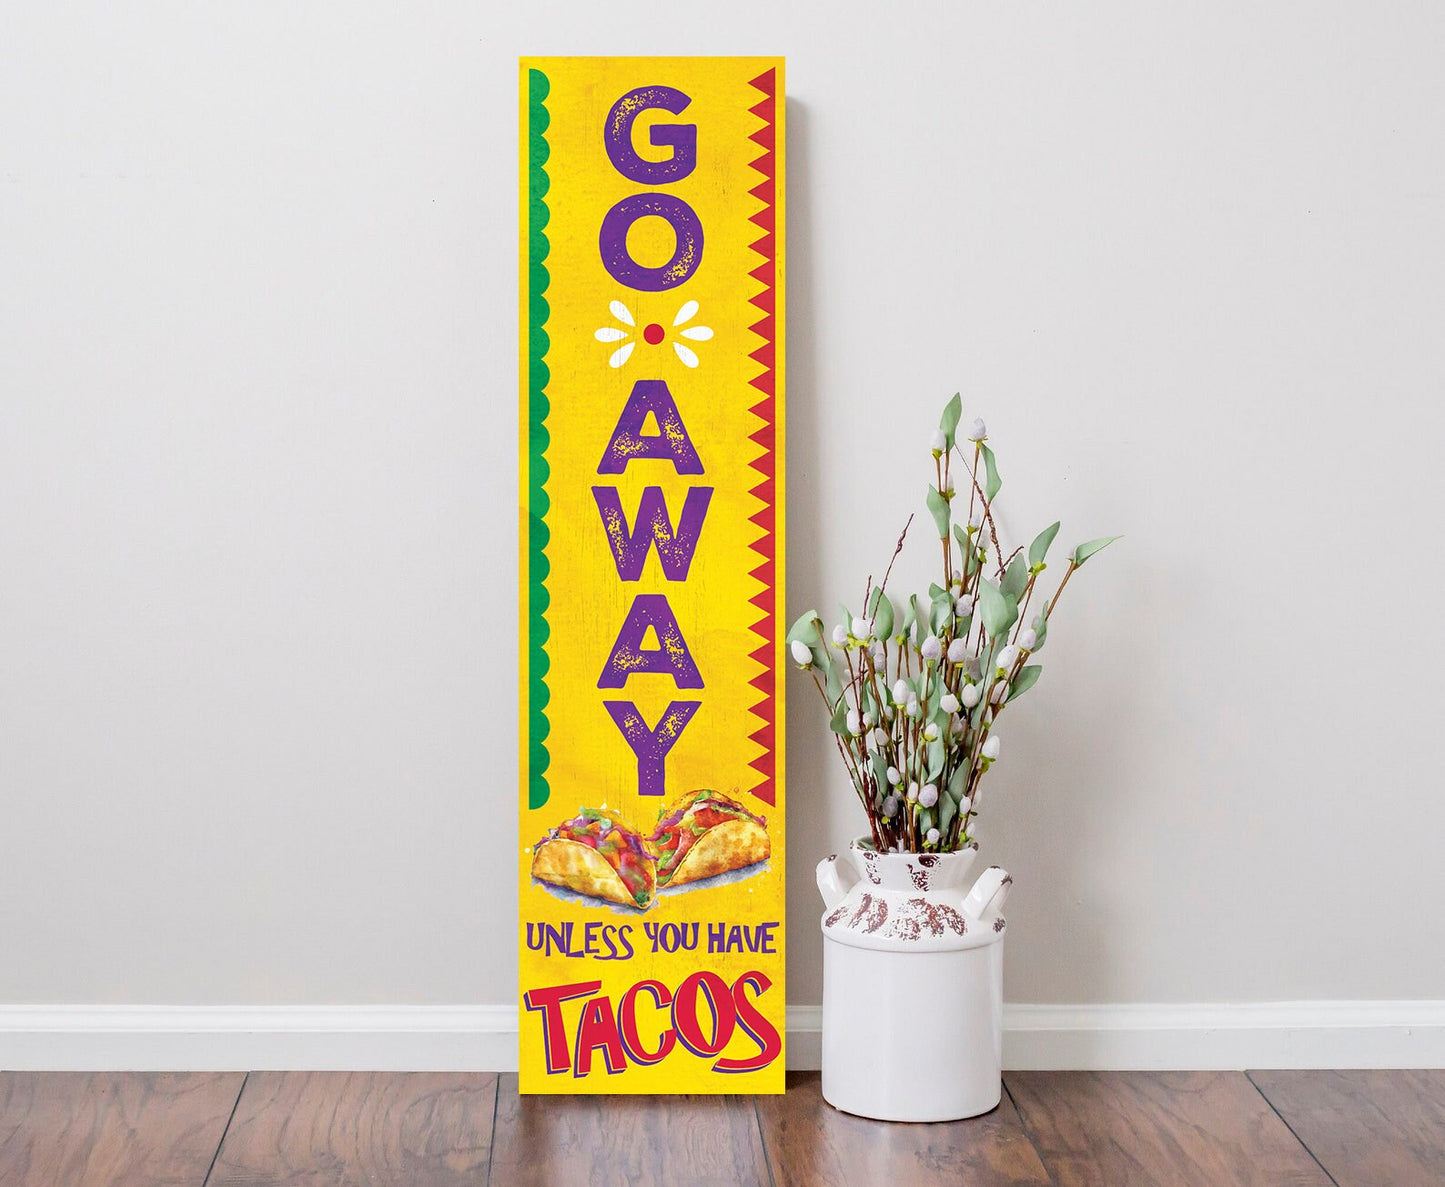 36in Humorous Wooden Sign "Go Away Unless You Have Tacos", Funny Wall Decor for Home, Office, or Kitchen